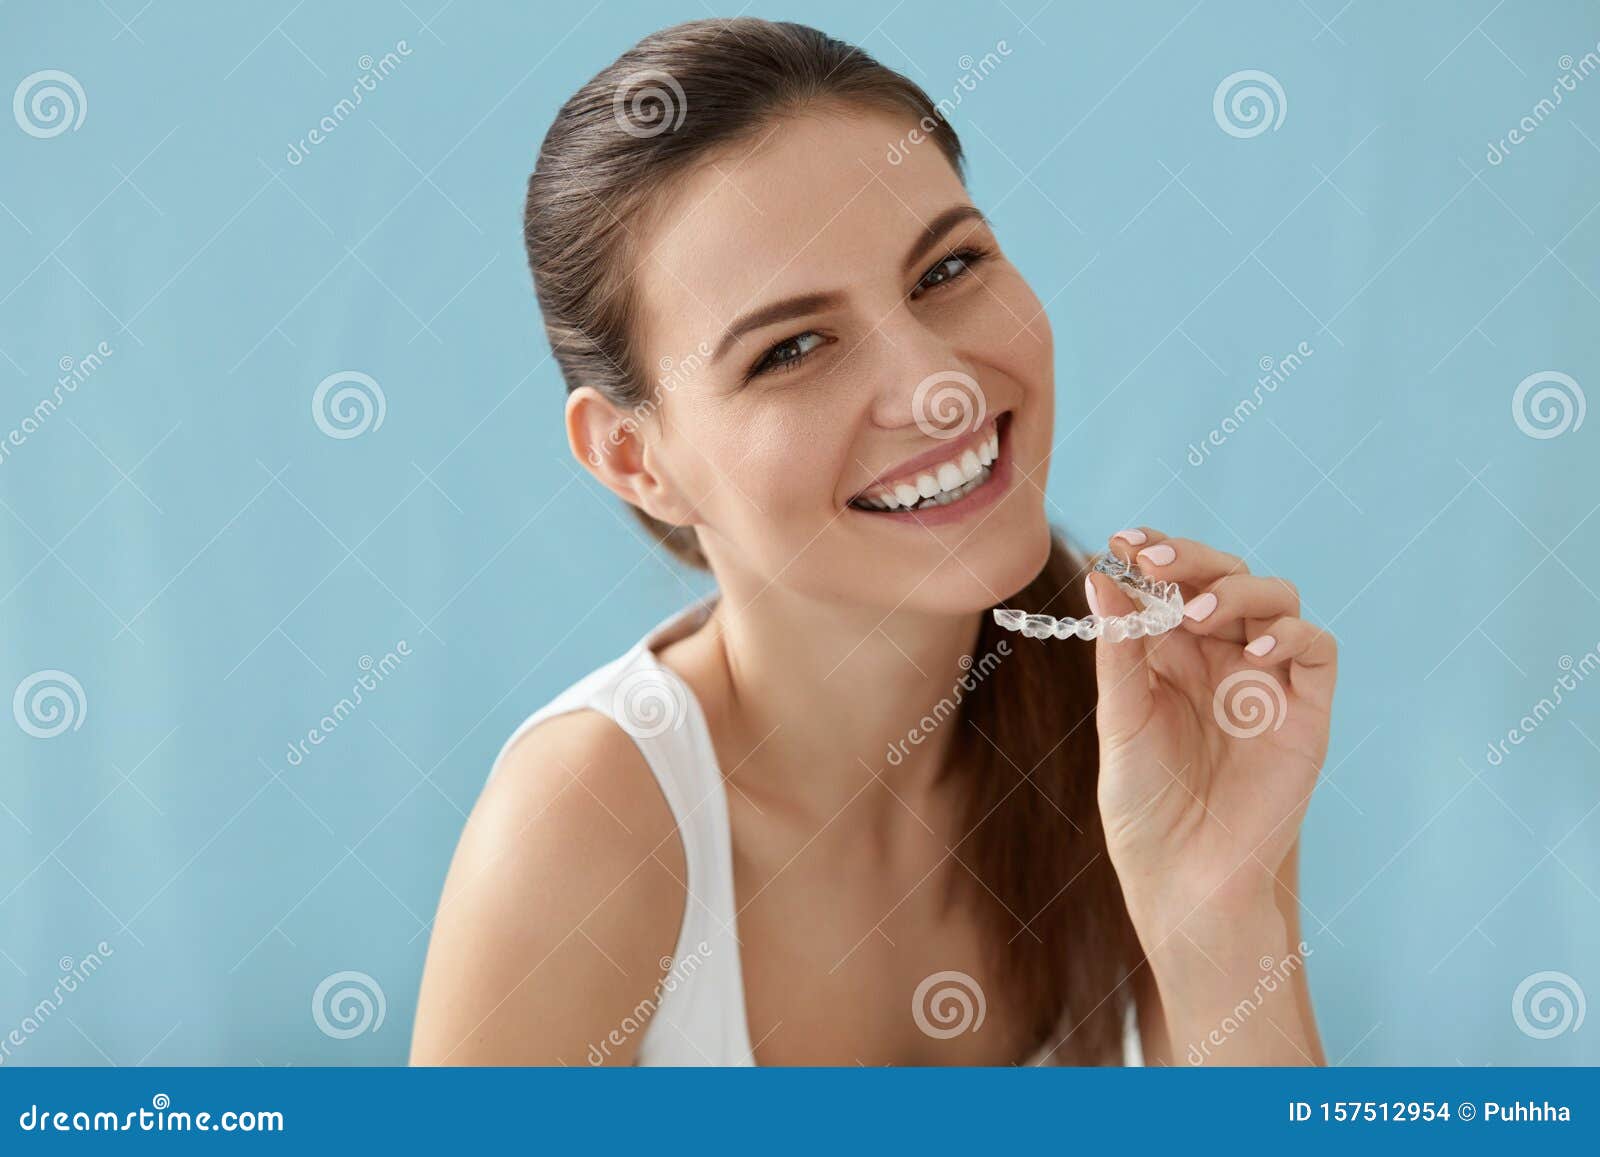 dental care. smiling woman using removable clear teeth braces